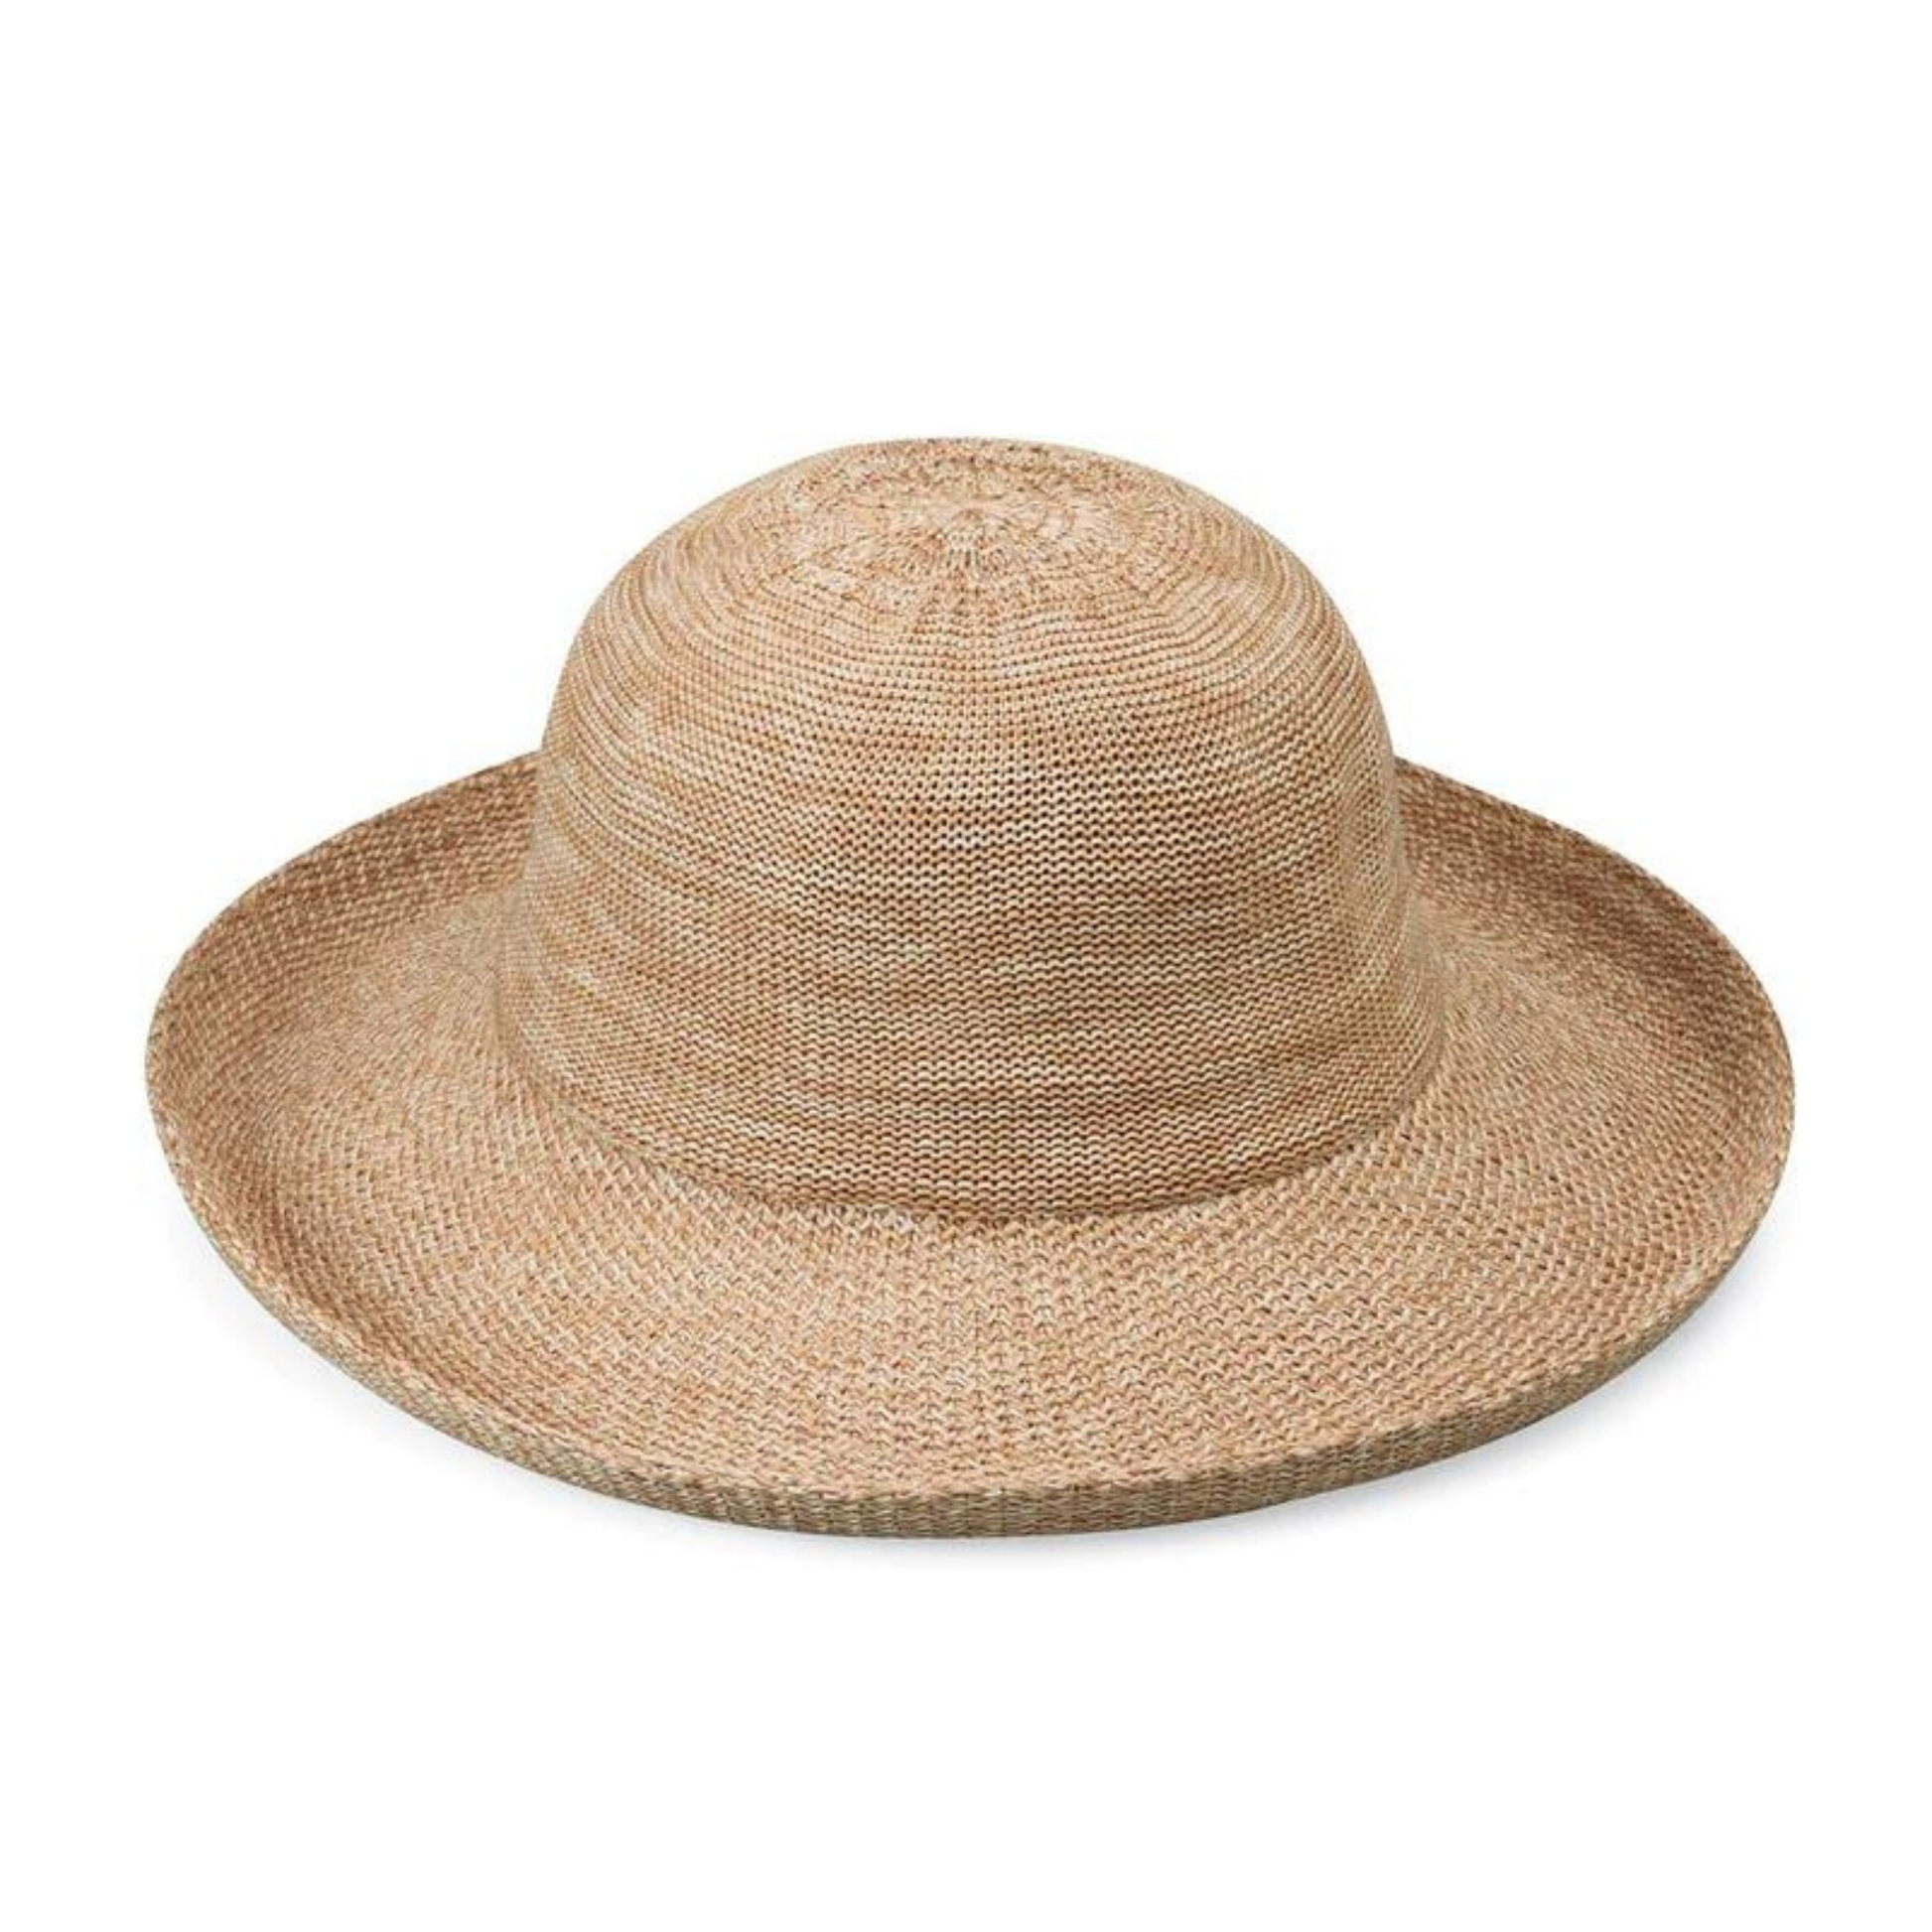 A front view of a light brown weaved sunhat.